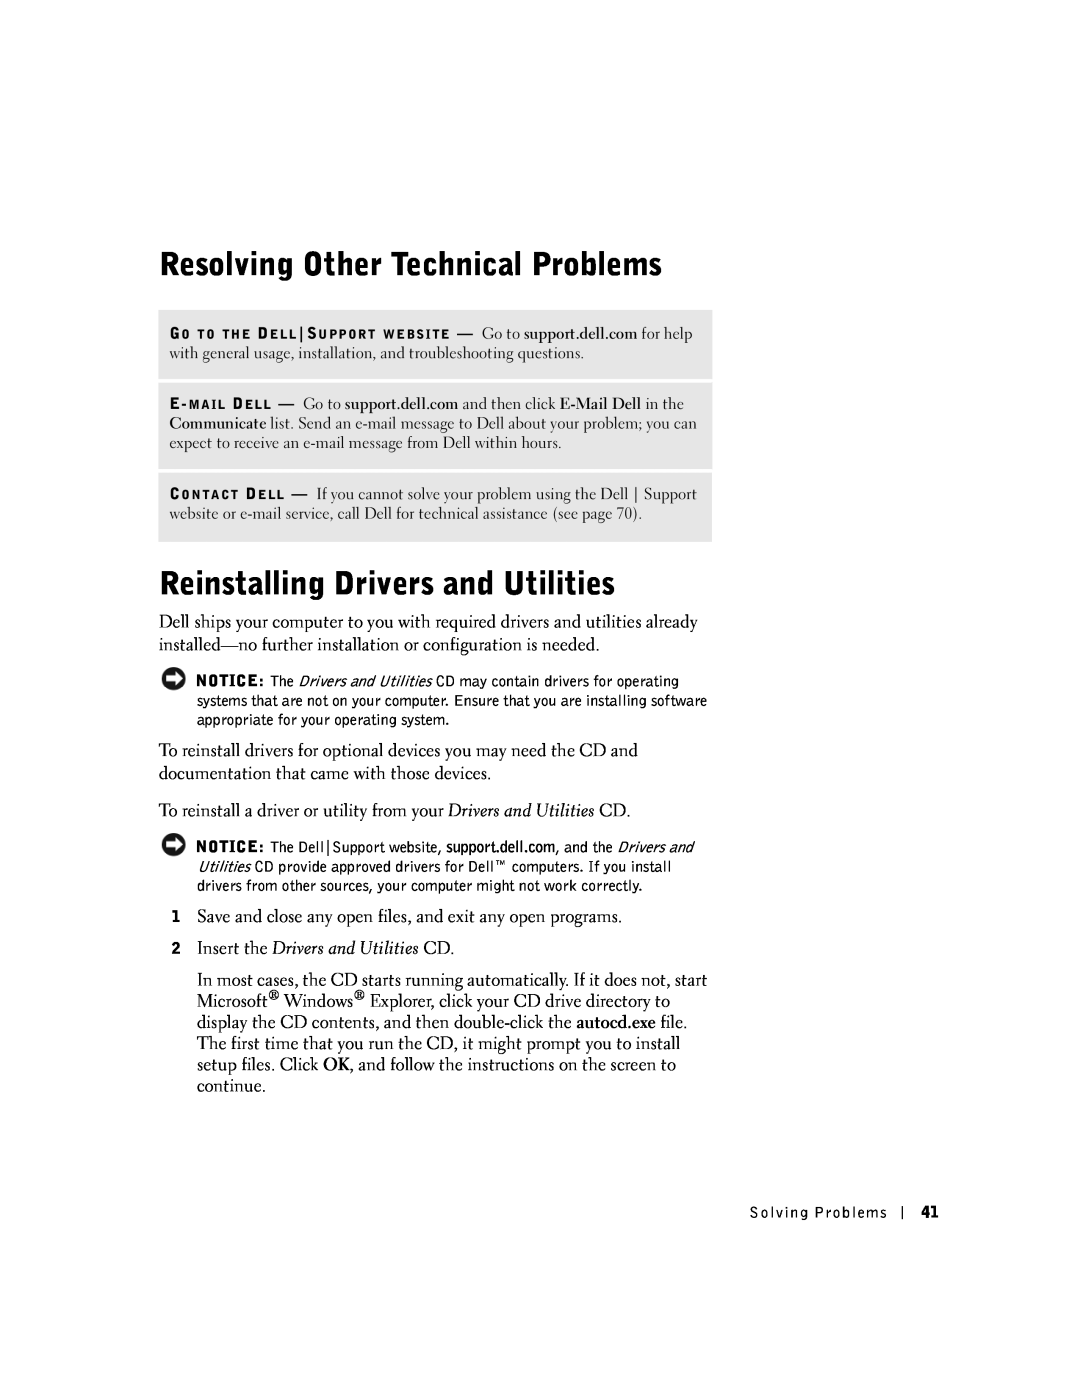 Dell 100N owner manual Resolving Other Technical Problems, Reinstalling Drivers and Utilities 